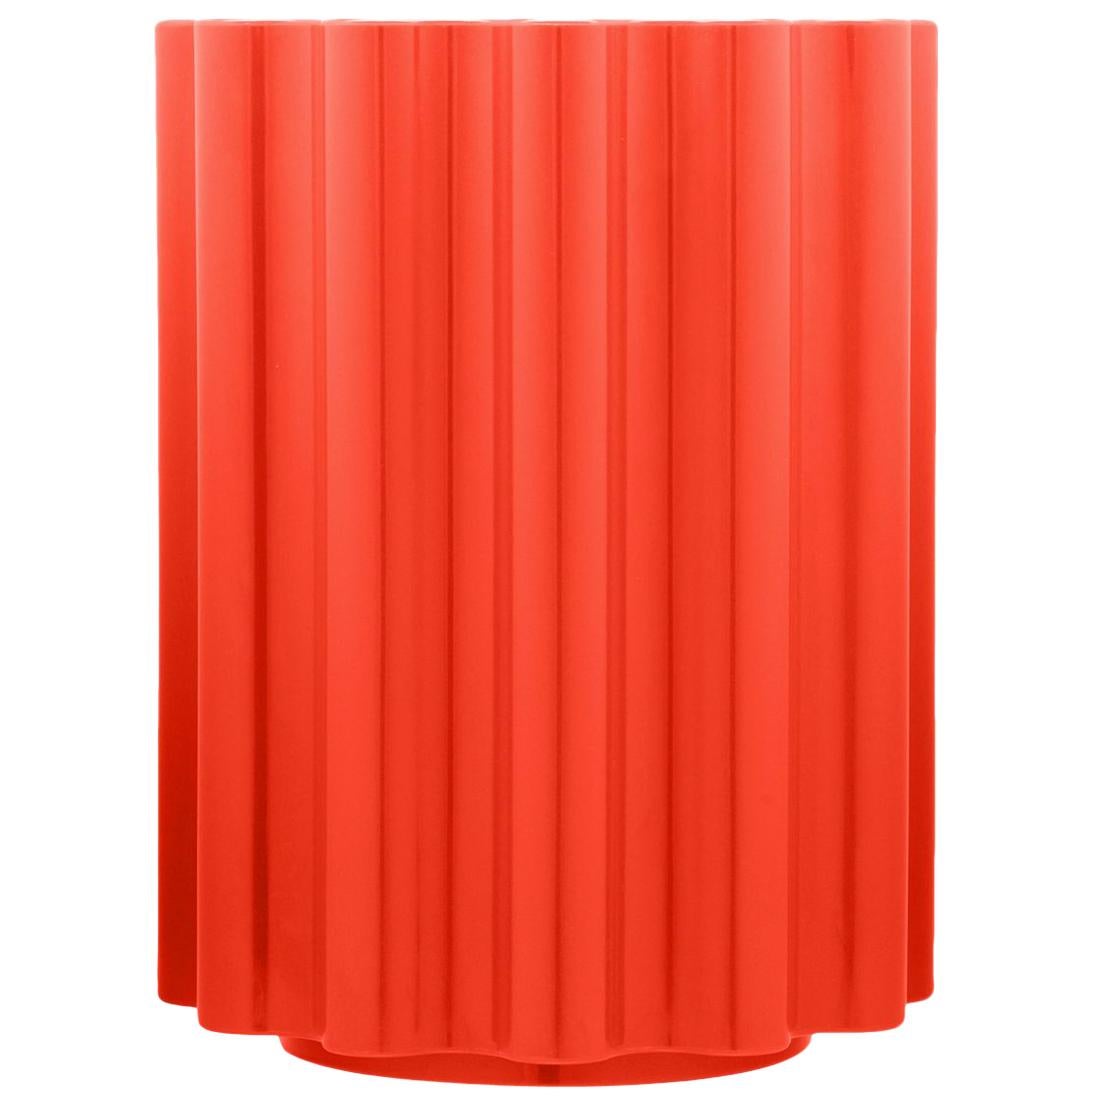 Kartell Colonna Stool in Red by Ettore Sottsass